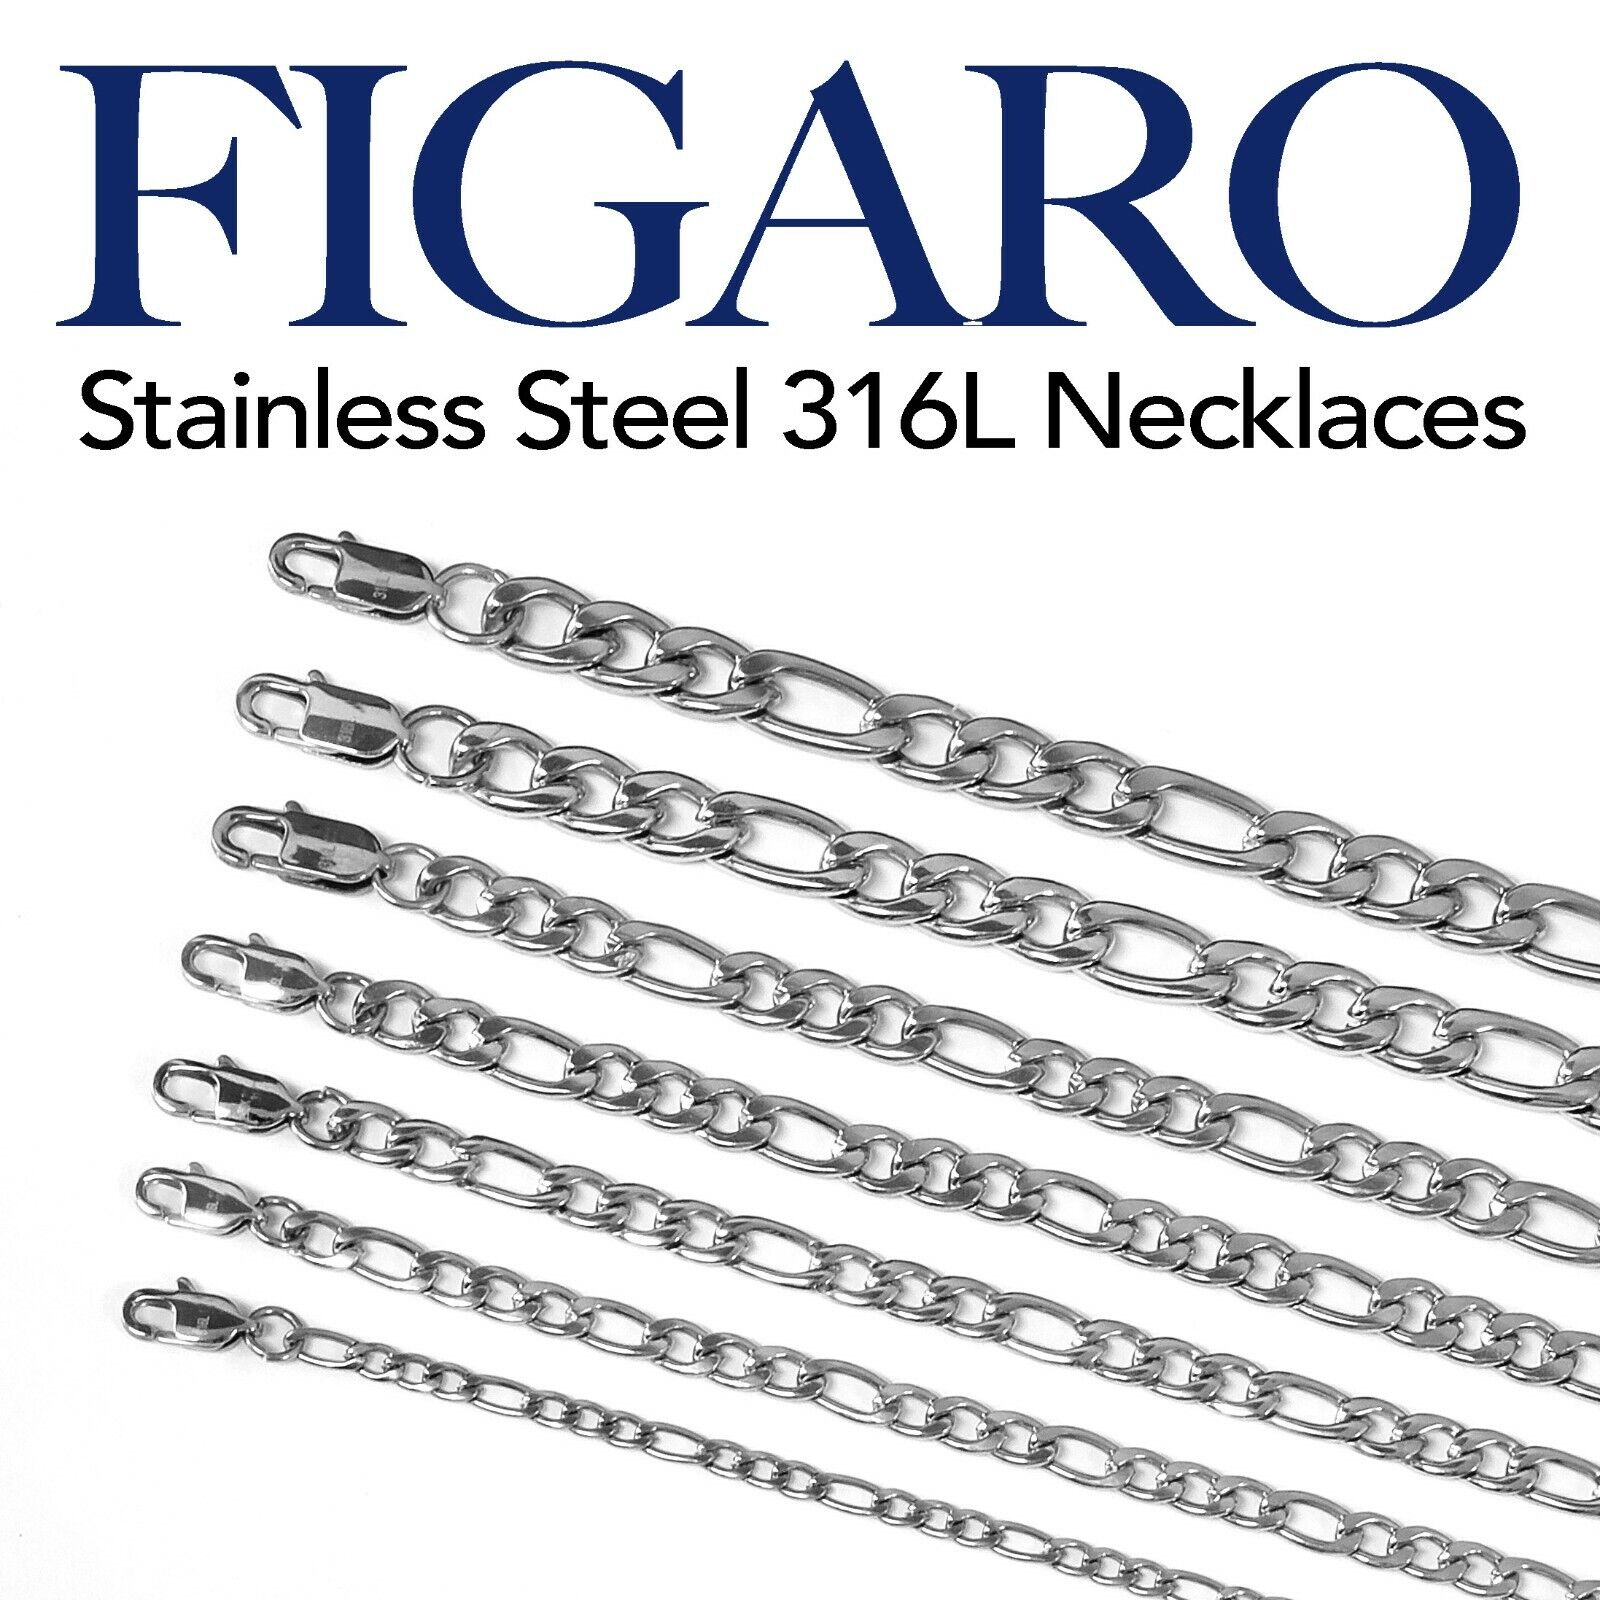 Figaro Stainless Steel 316L Link Chain Necklace Man Woman 14in-48in Silver Color JCbrilliance